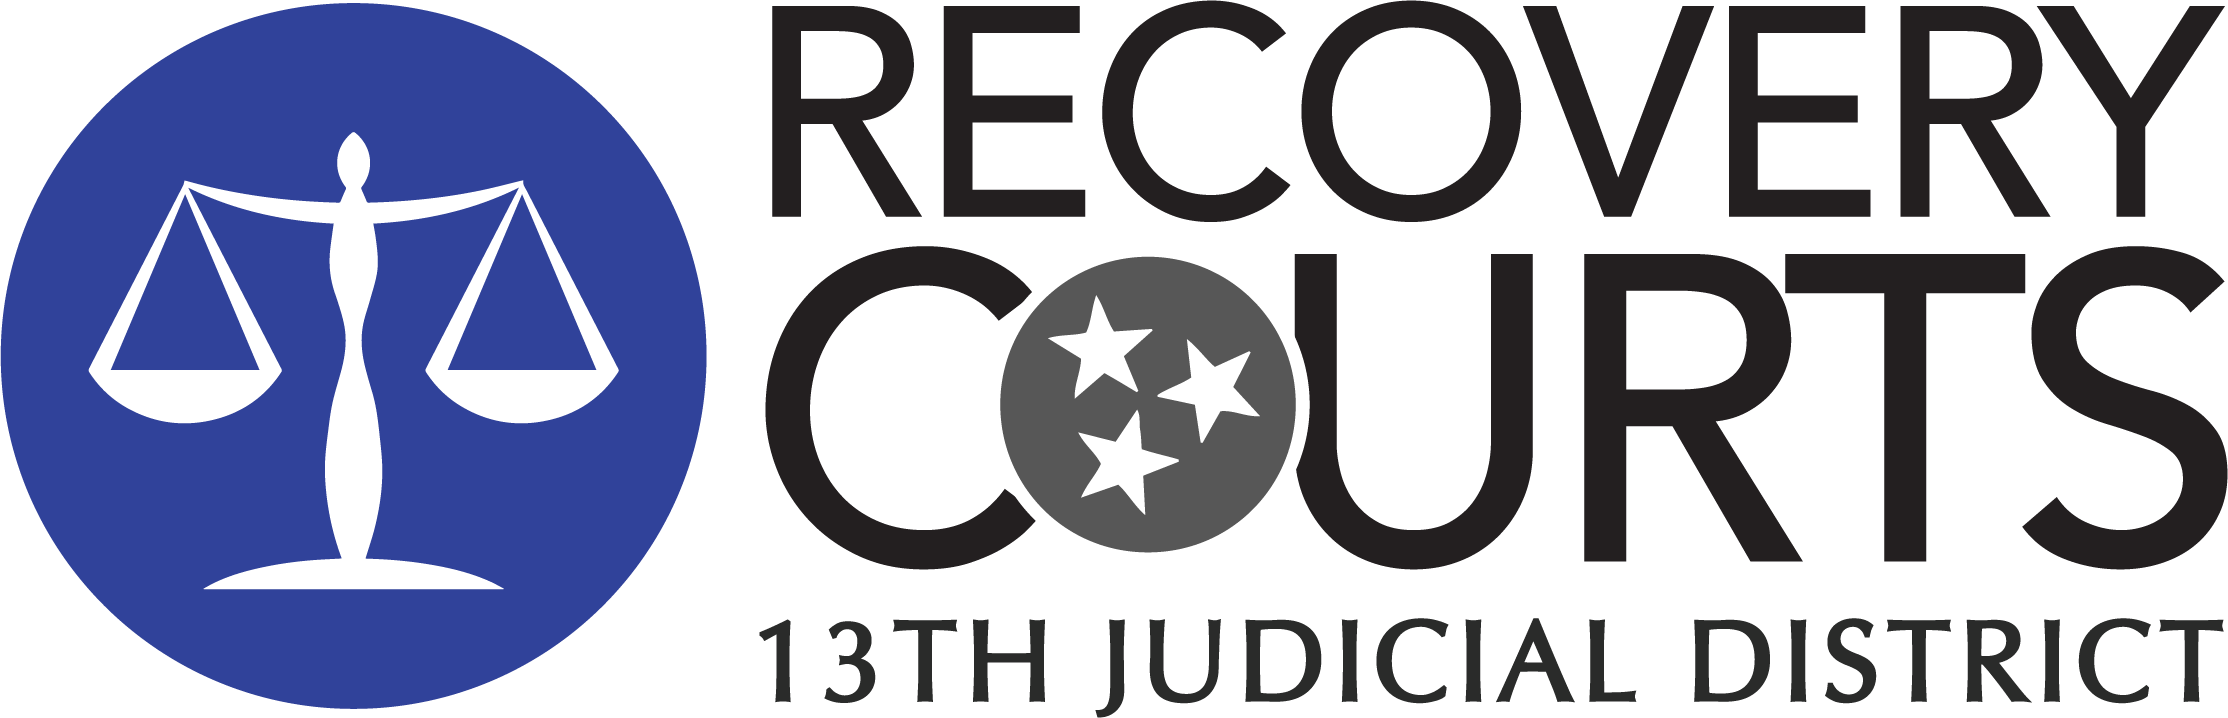 13th Recovery Courts | Cookeville, TN